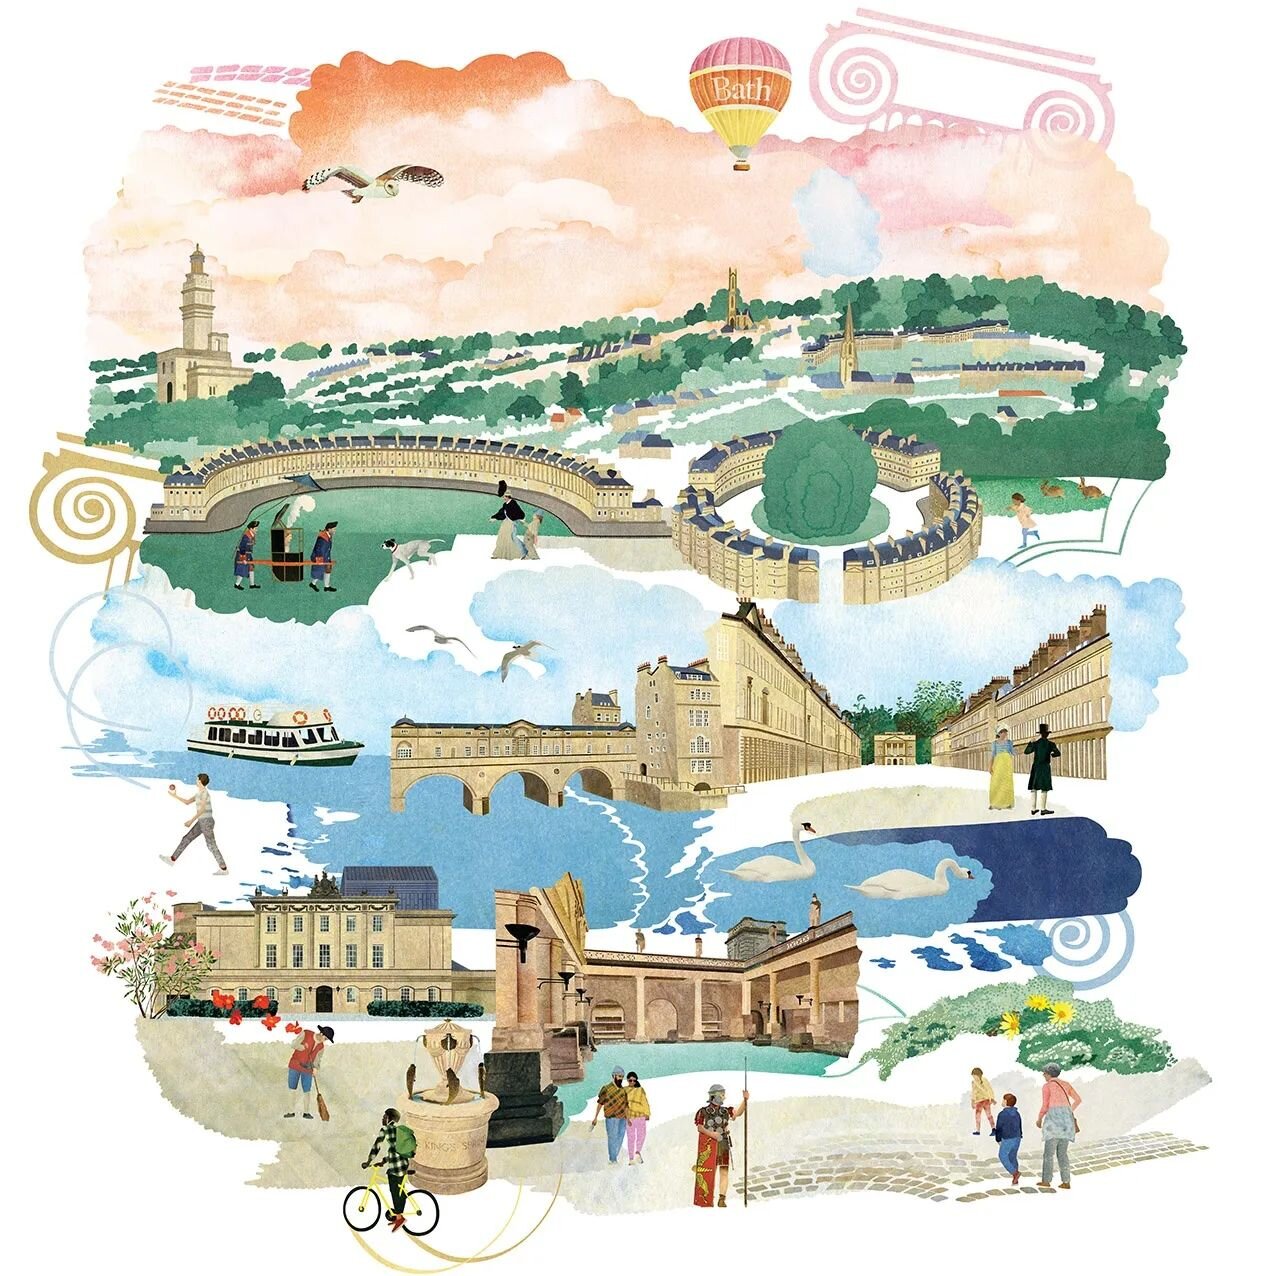 Illustration for Bath World Heritage Centre💚💜💙.
---
I created this image for the Centre's retail products,&nbsp;depicting beautiful&nbsp;cityscape with the best&nbsp;places to visit in Bath. Tea towels, postcards, tote bags, mug cups etc with my i